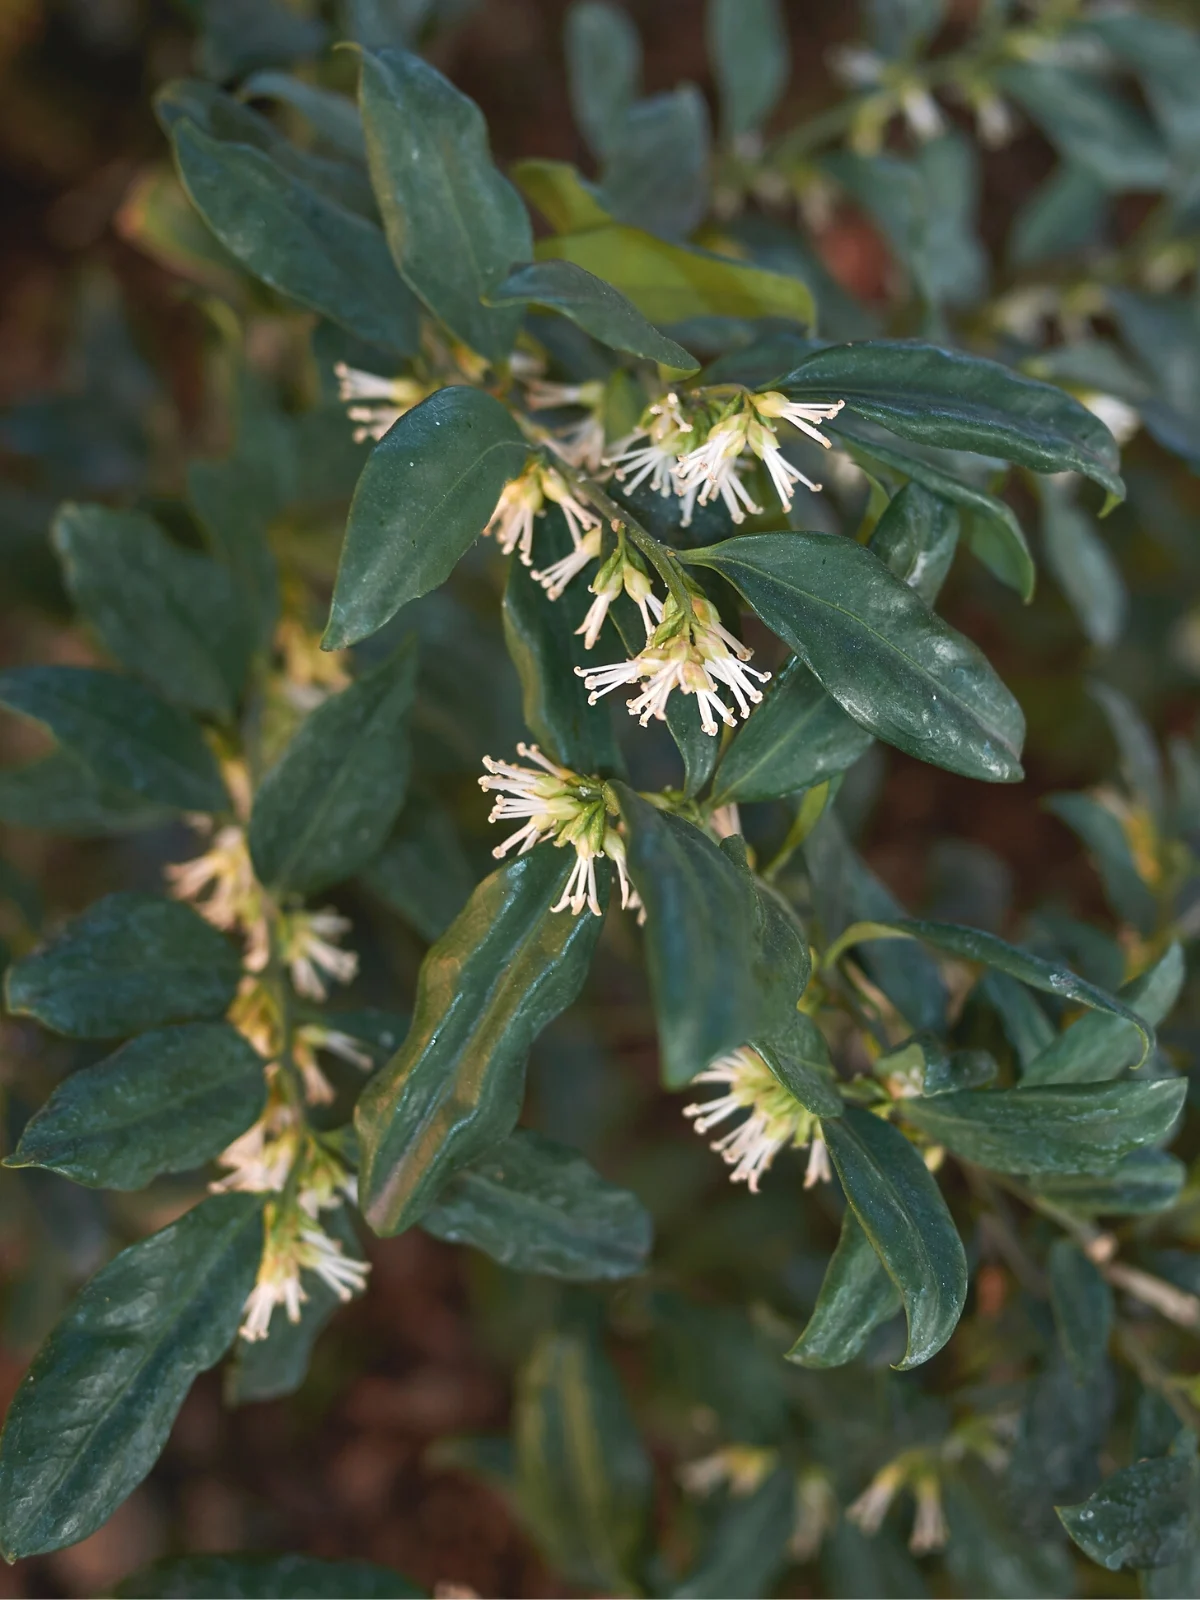 Sarcococca confuse (Christmas sweet box) flowers